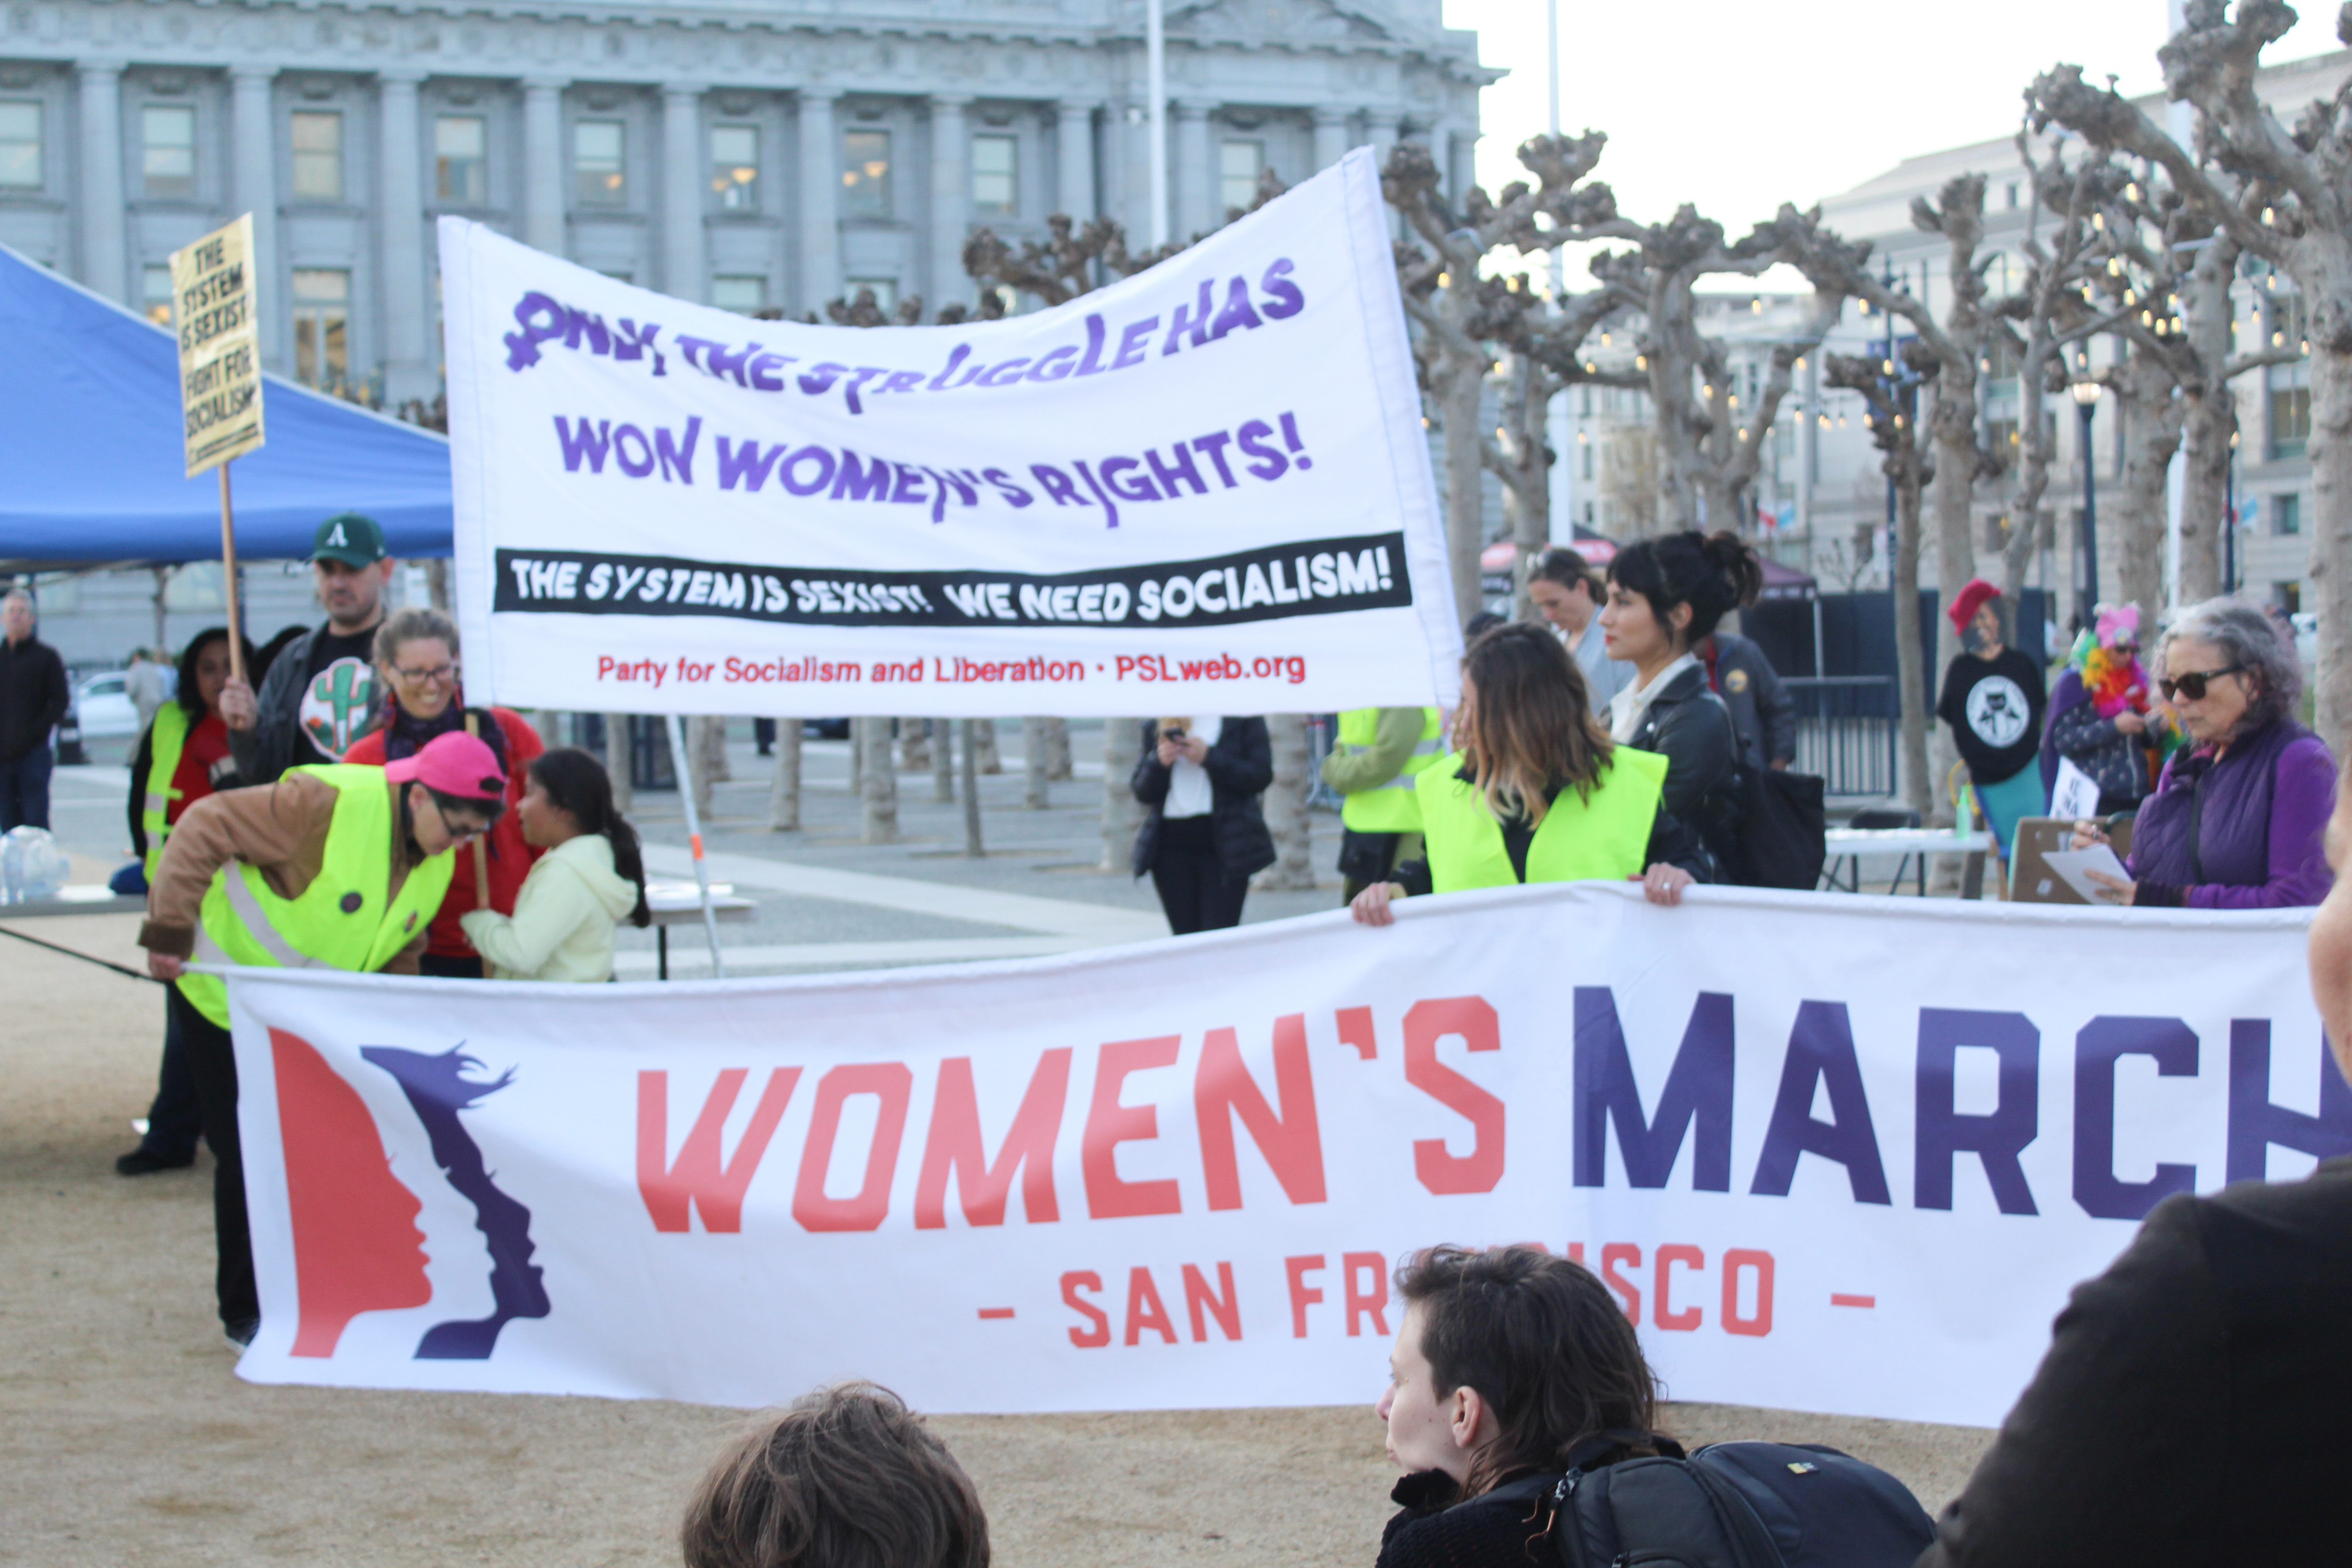 Women's March San Francisco's banners waved in the breeze at  International Women's Day at Civic Center Plaza in San Francisco on March 8, 2018. Photo by Adina J. Pernell/Special to The Guardsman.